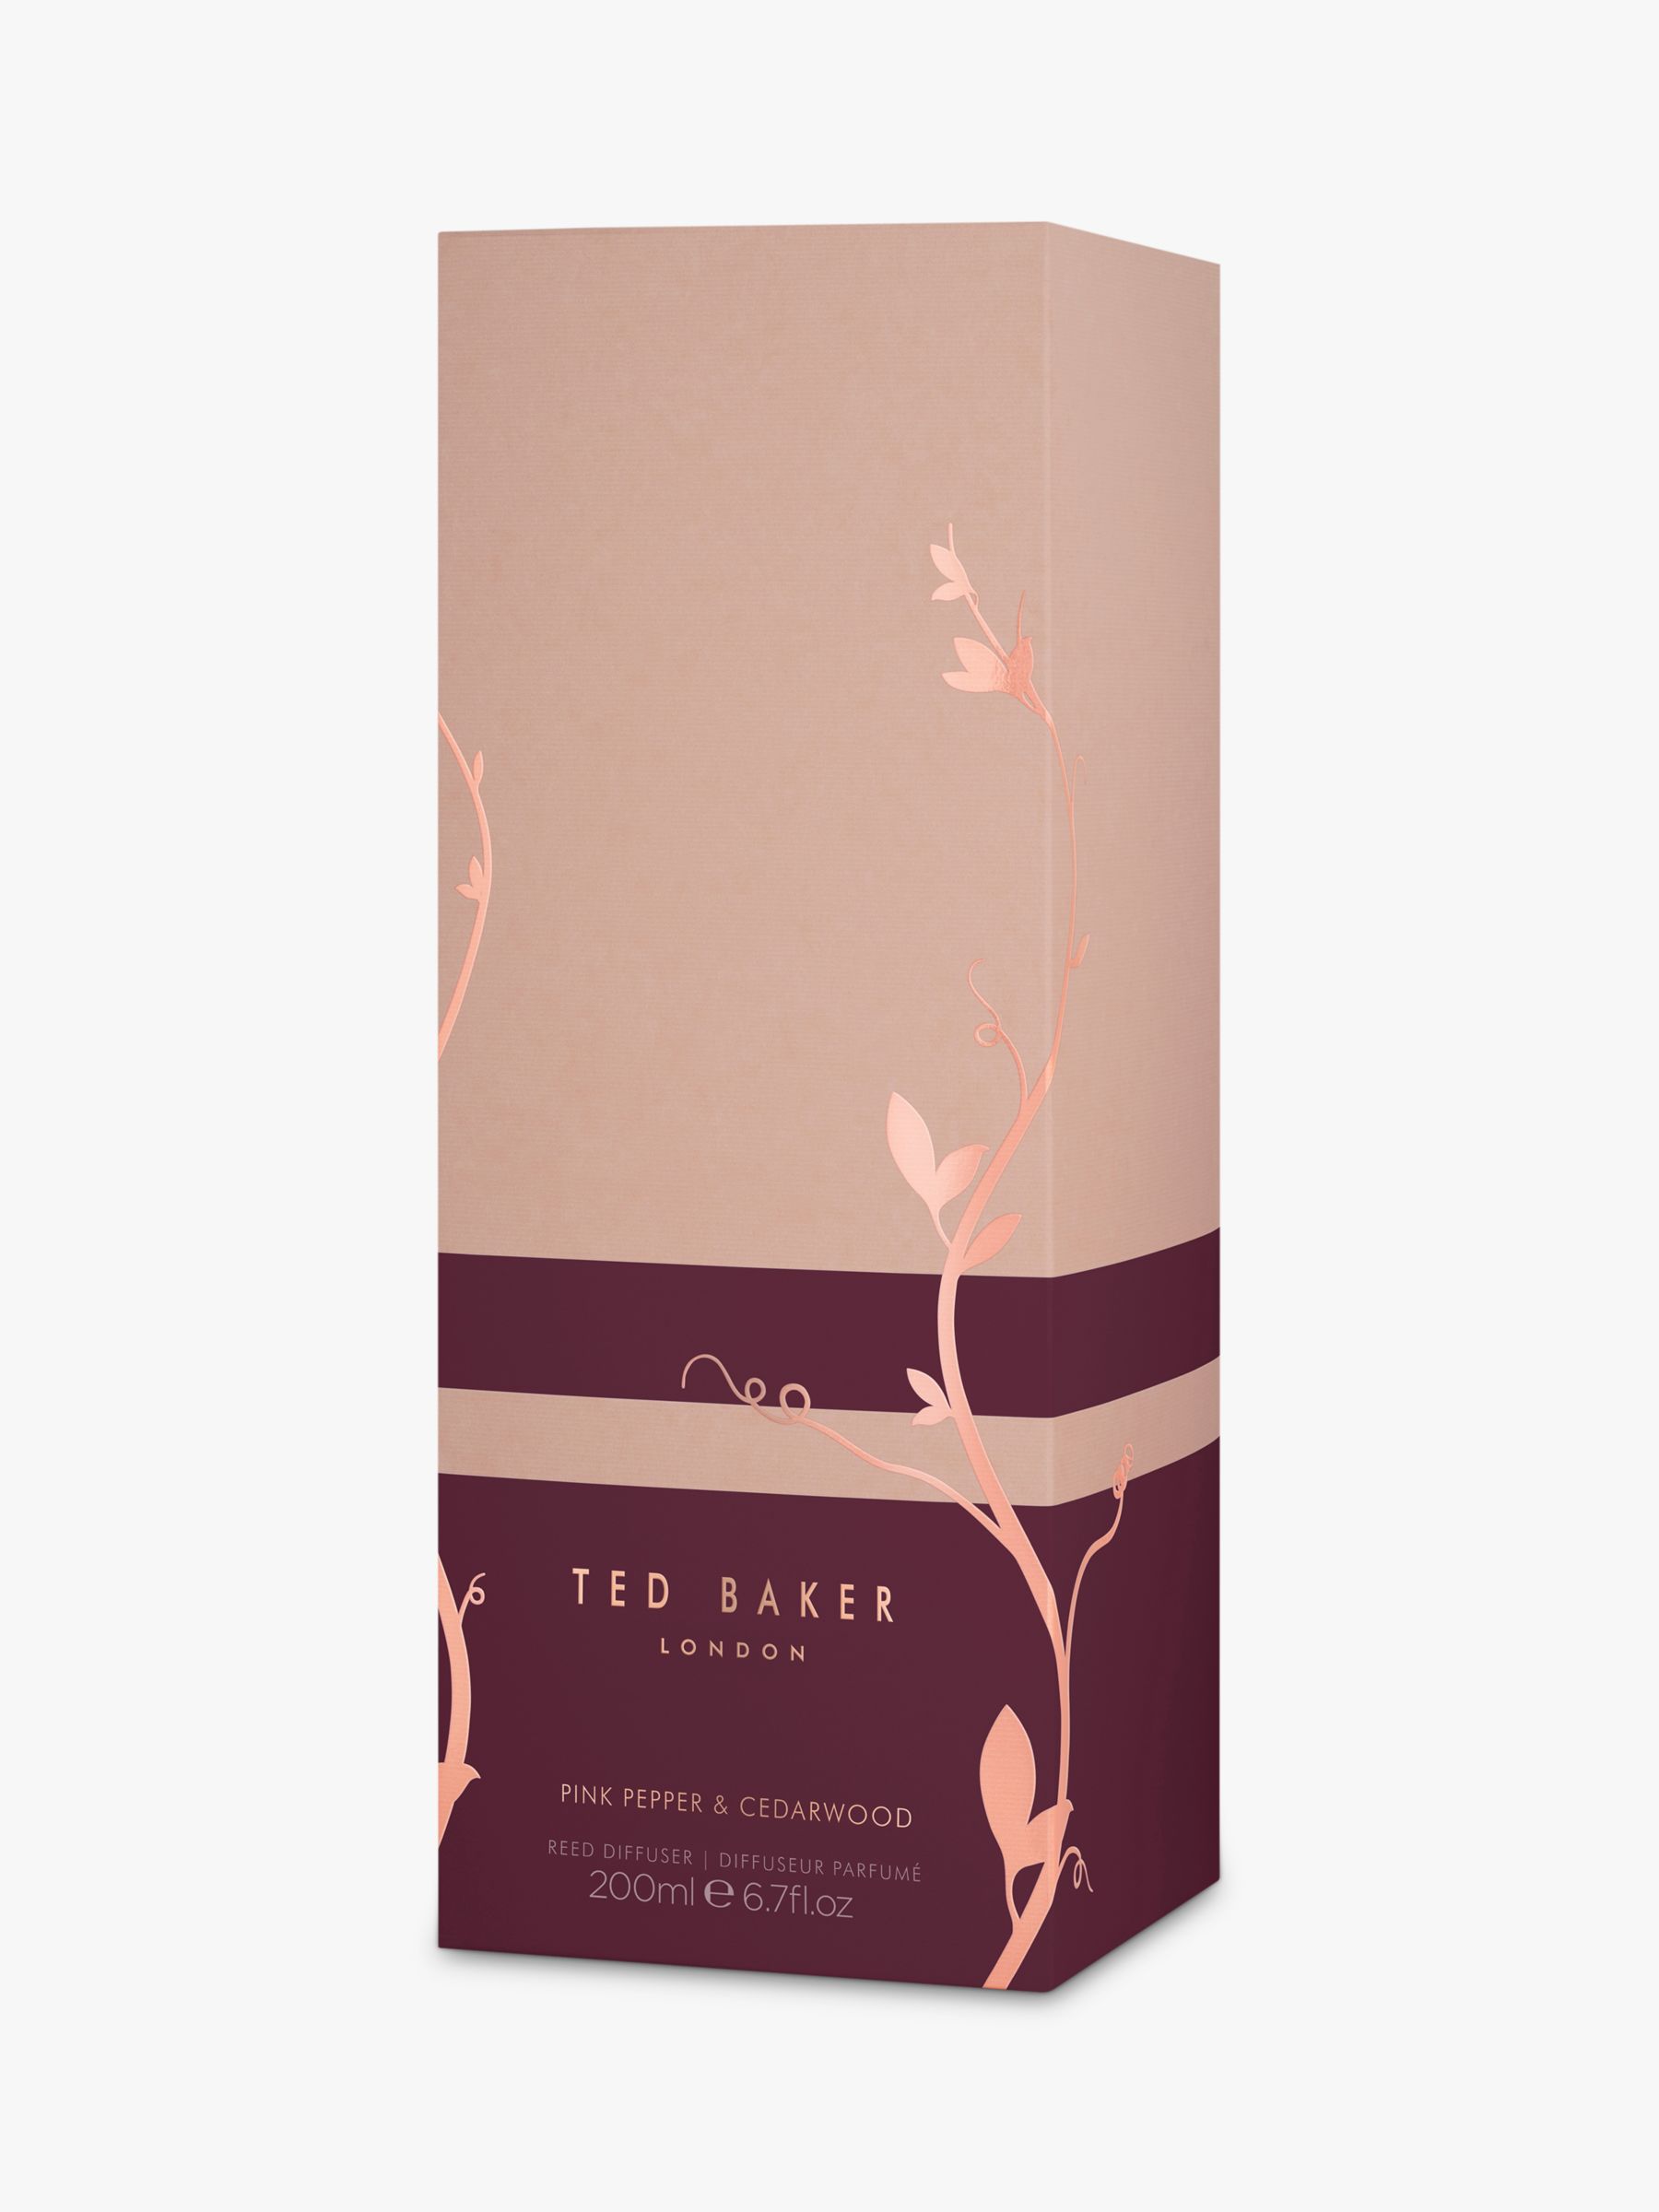 Ted Baker Pink Pepper & Cedarwood Reed Diffuser, 200ml